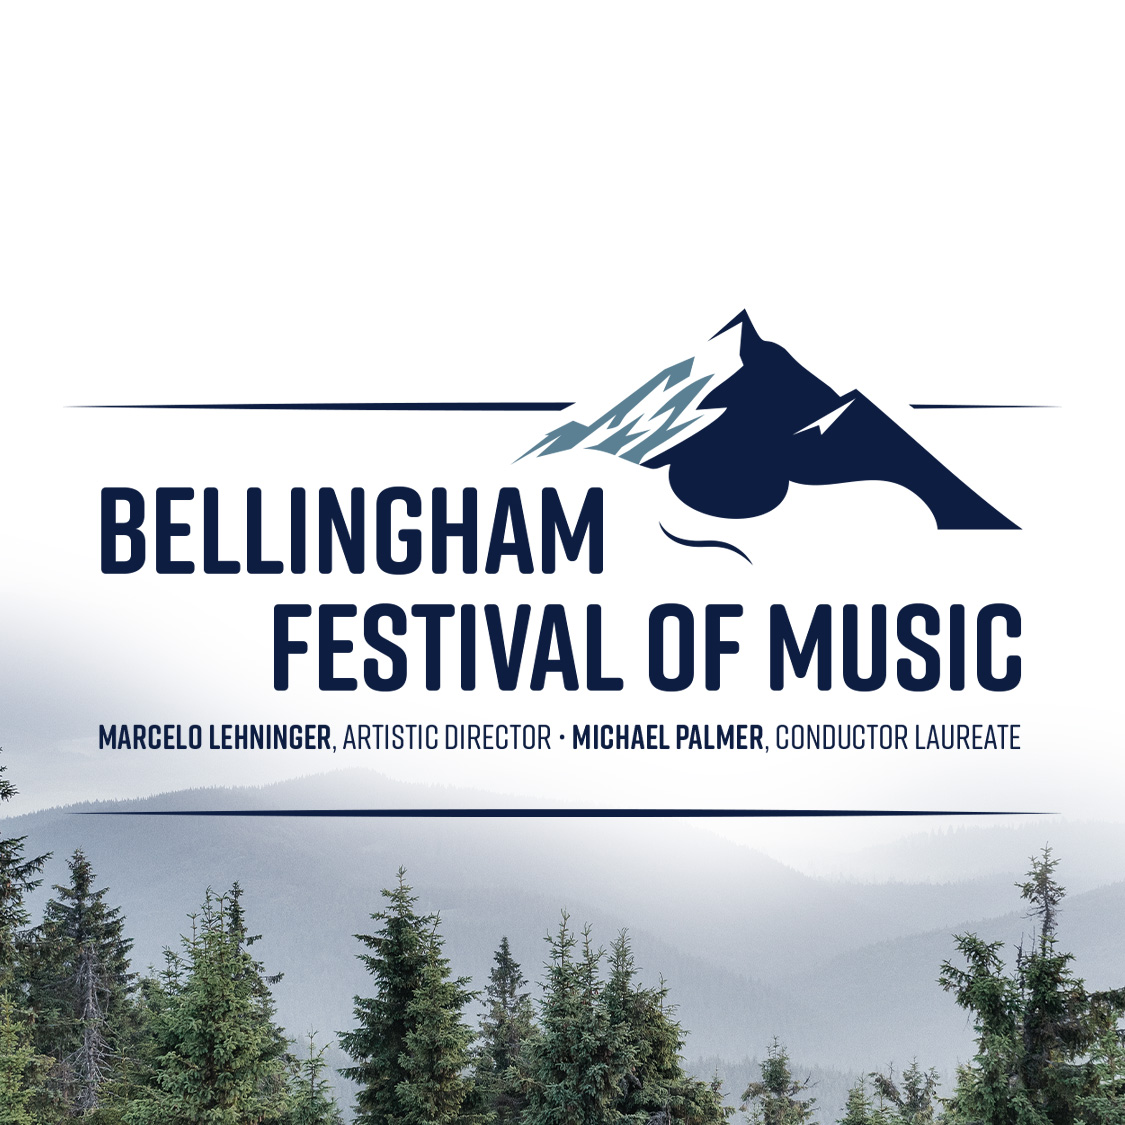 Photo of the logo for The Bellingham Festival of Music with trees at the bottom.